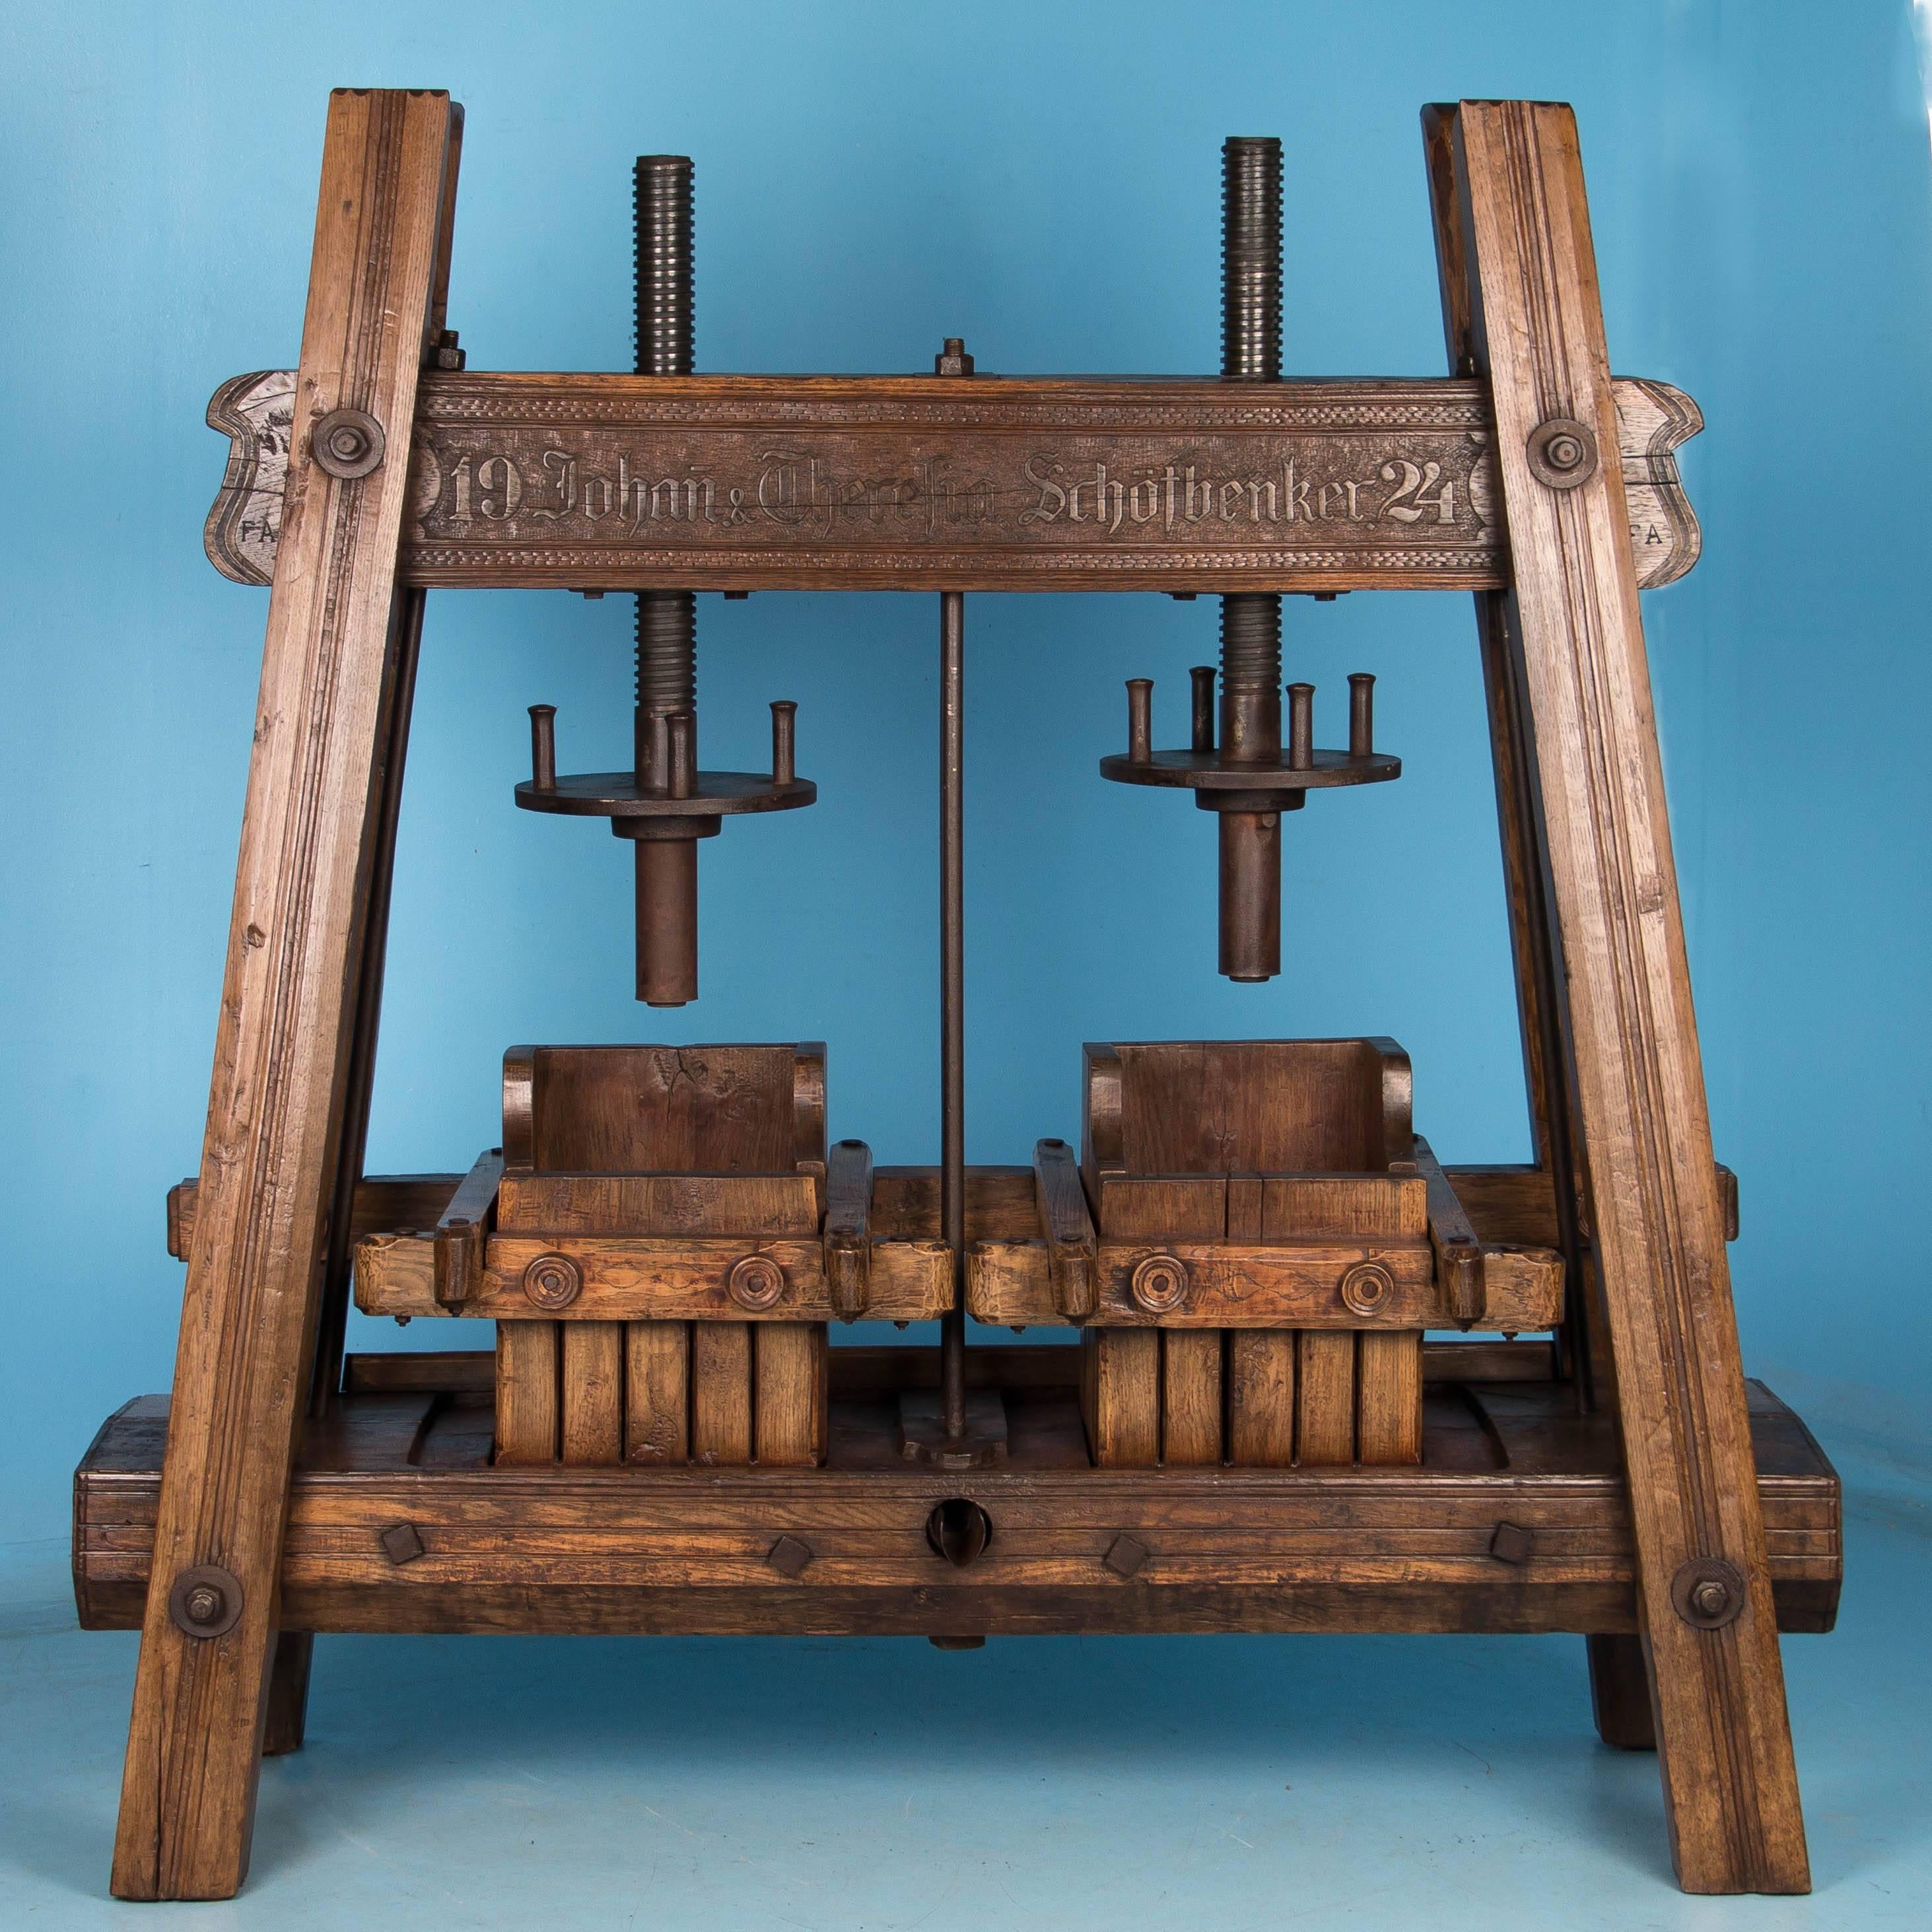 This extremely rare freestanding, dual wine press is handcrafted from solid oak. Used for crushing fruit like grapes for wine or apples for cider, this large, very sturdy press is complete and all original. The large beam holding the cast iron